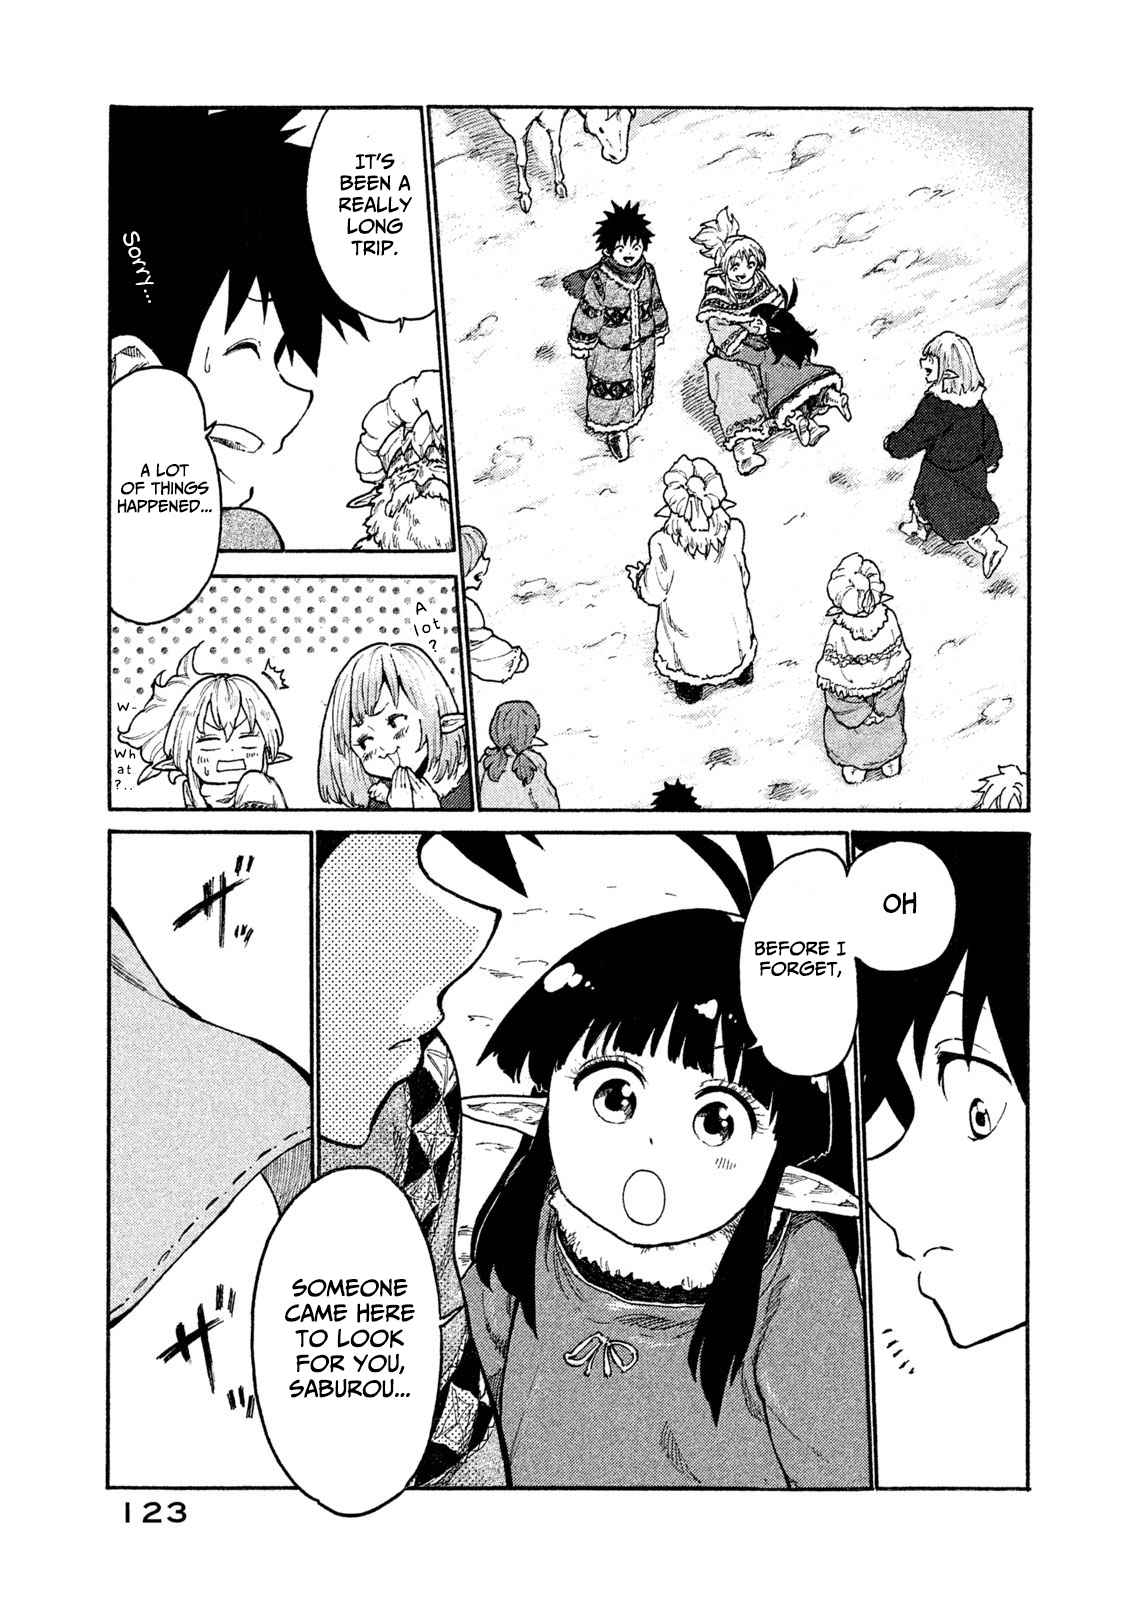 Mazumeshi Elf to Yuboku gurashi Vol. 2 Ch. 9 Time for snow and being together